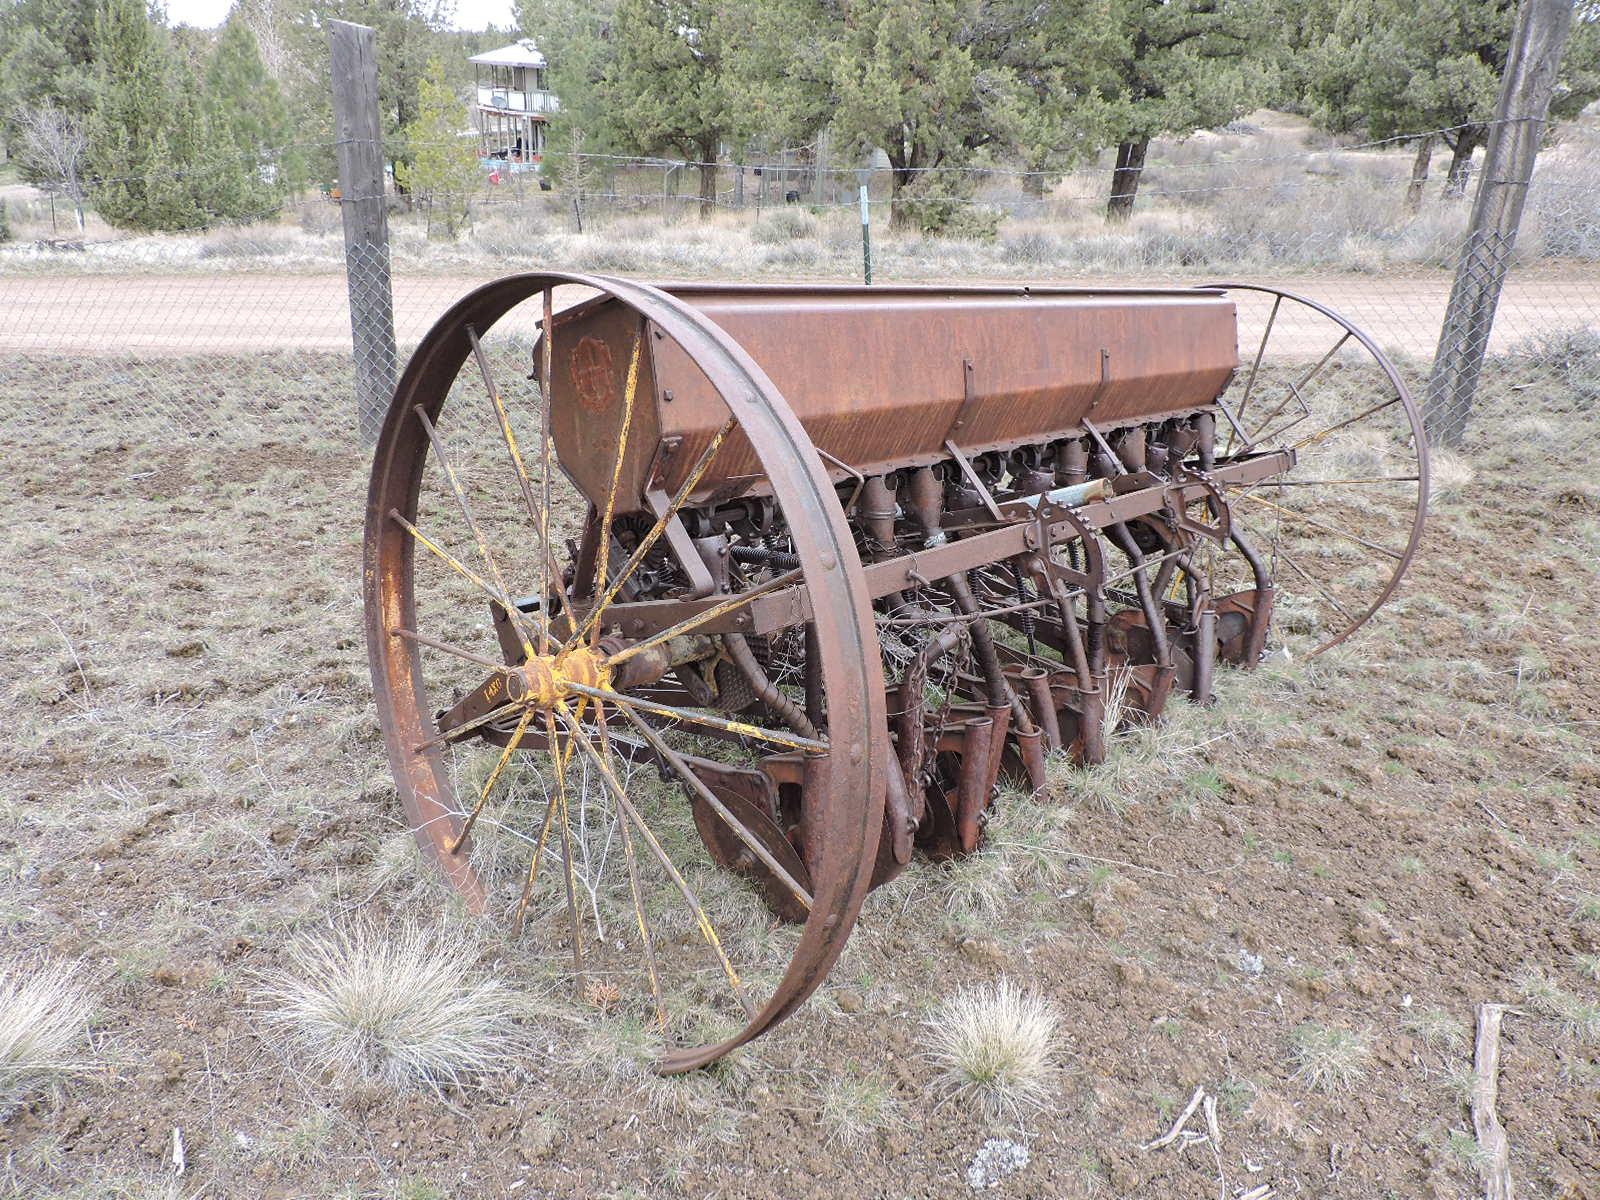 McCormick Deering Brand  Tow-Behind Fluted Grain Drill / 1920's Era